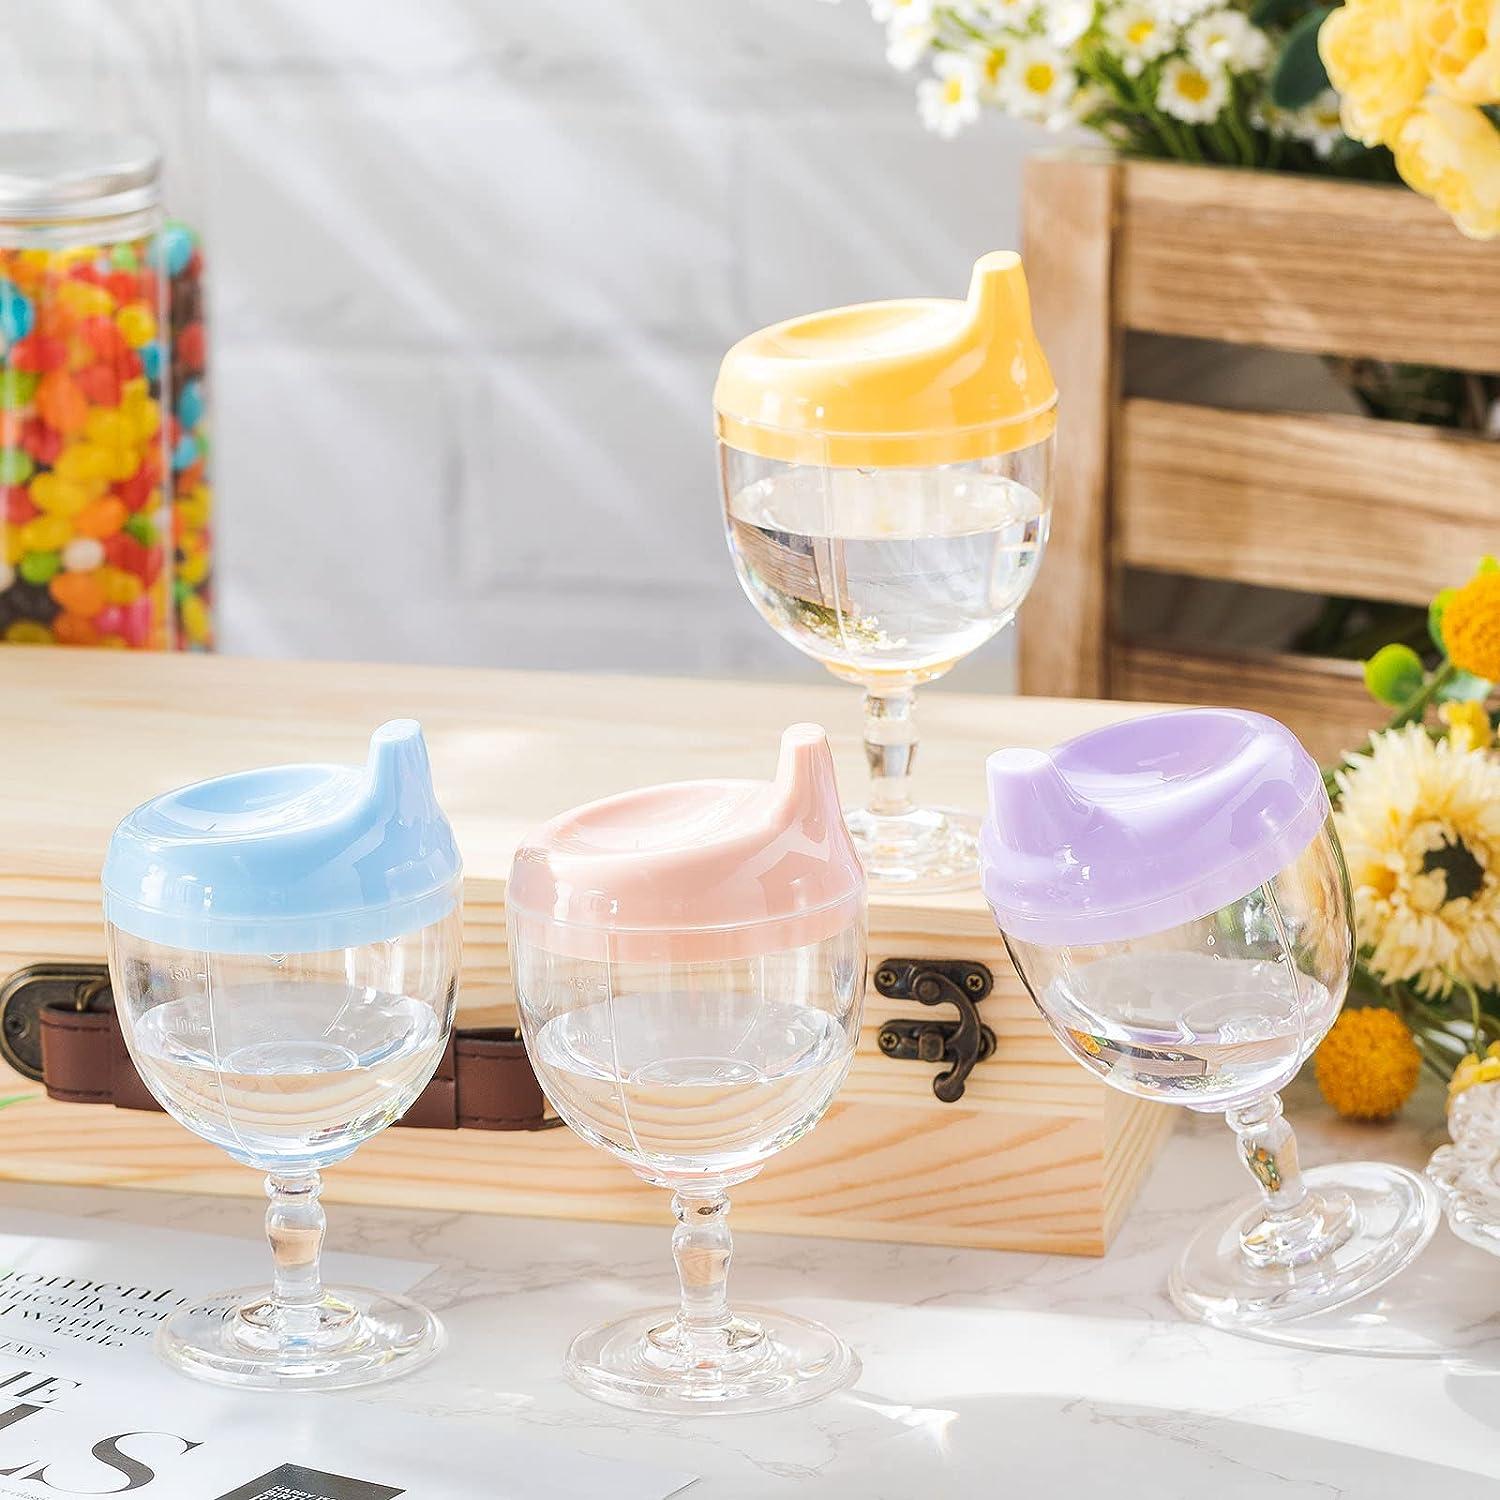 1pc Cheerful Party Cup for Kids,Baby Wine Sippy Cup,Juice Milk Training Cup,Fun  Plastic Goblet Chalices with Lid for Toddlers Birthday Party  Celebration-Random Color